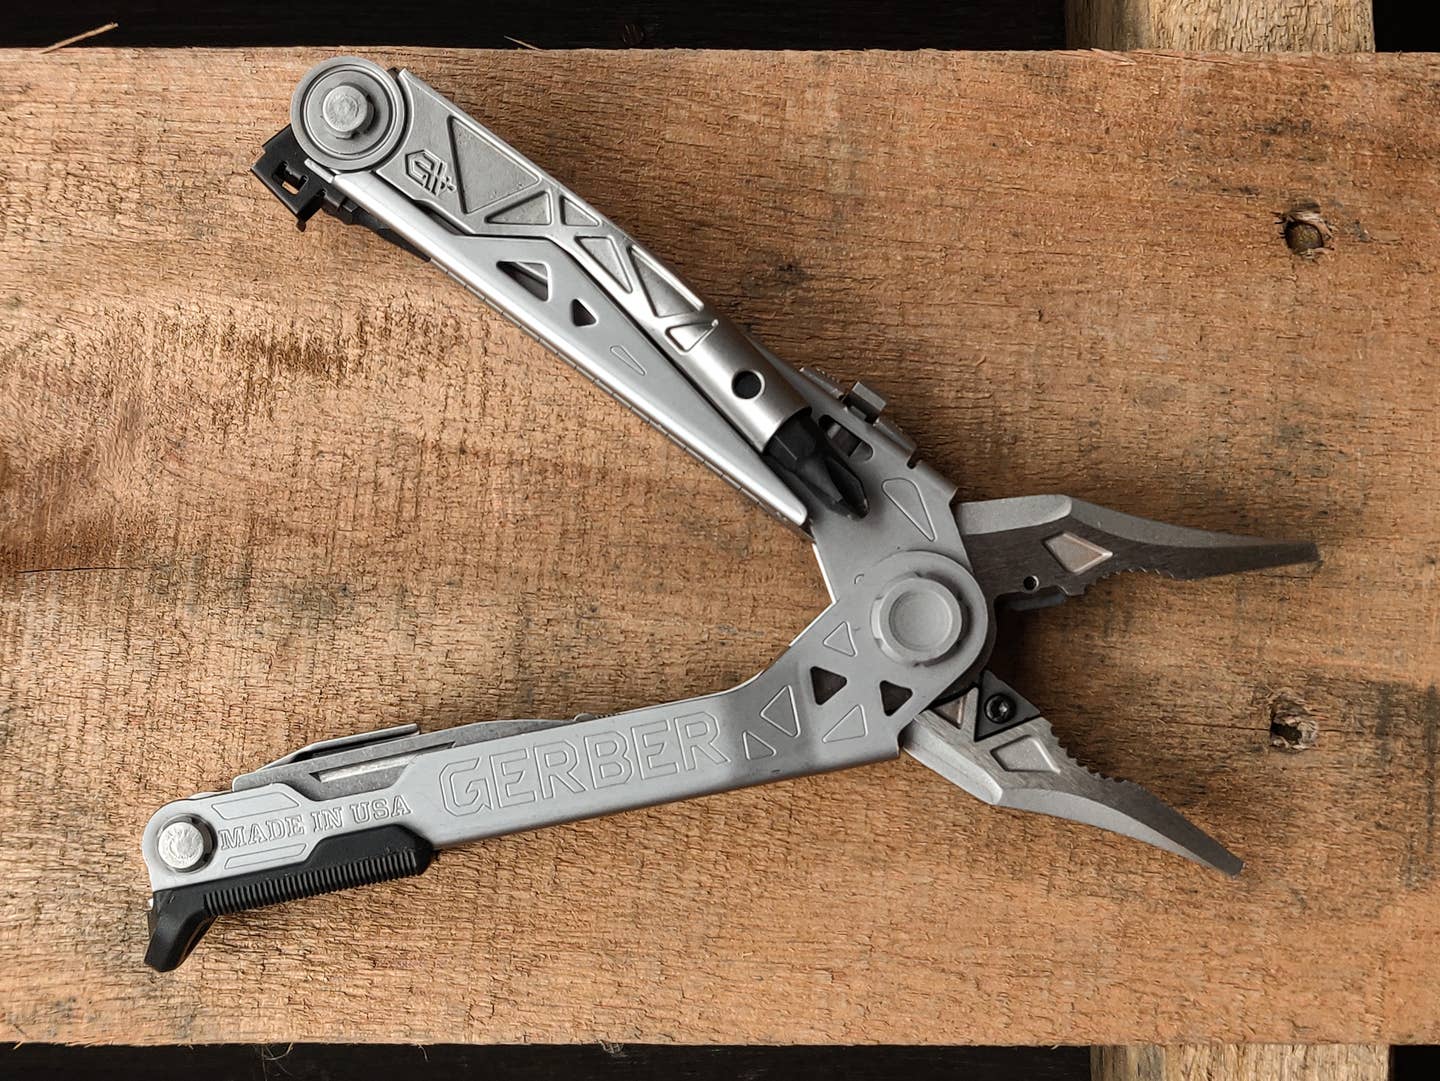 Gerber's center-drive plus multitool laying on a wood plank